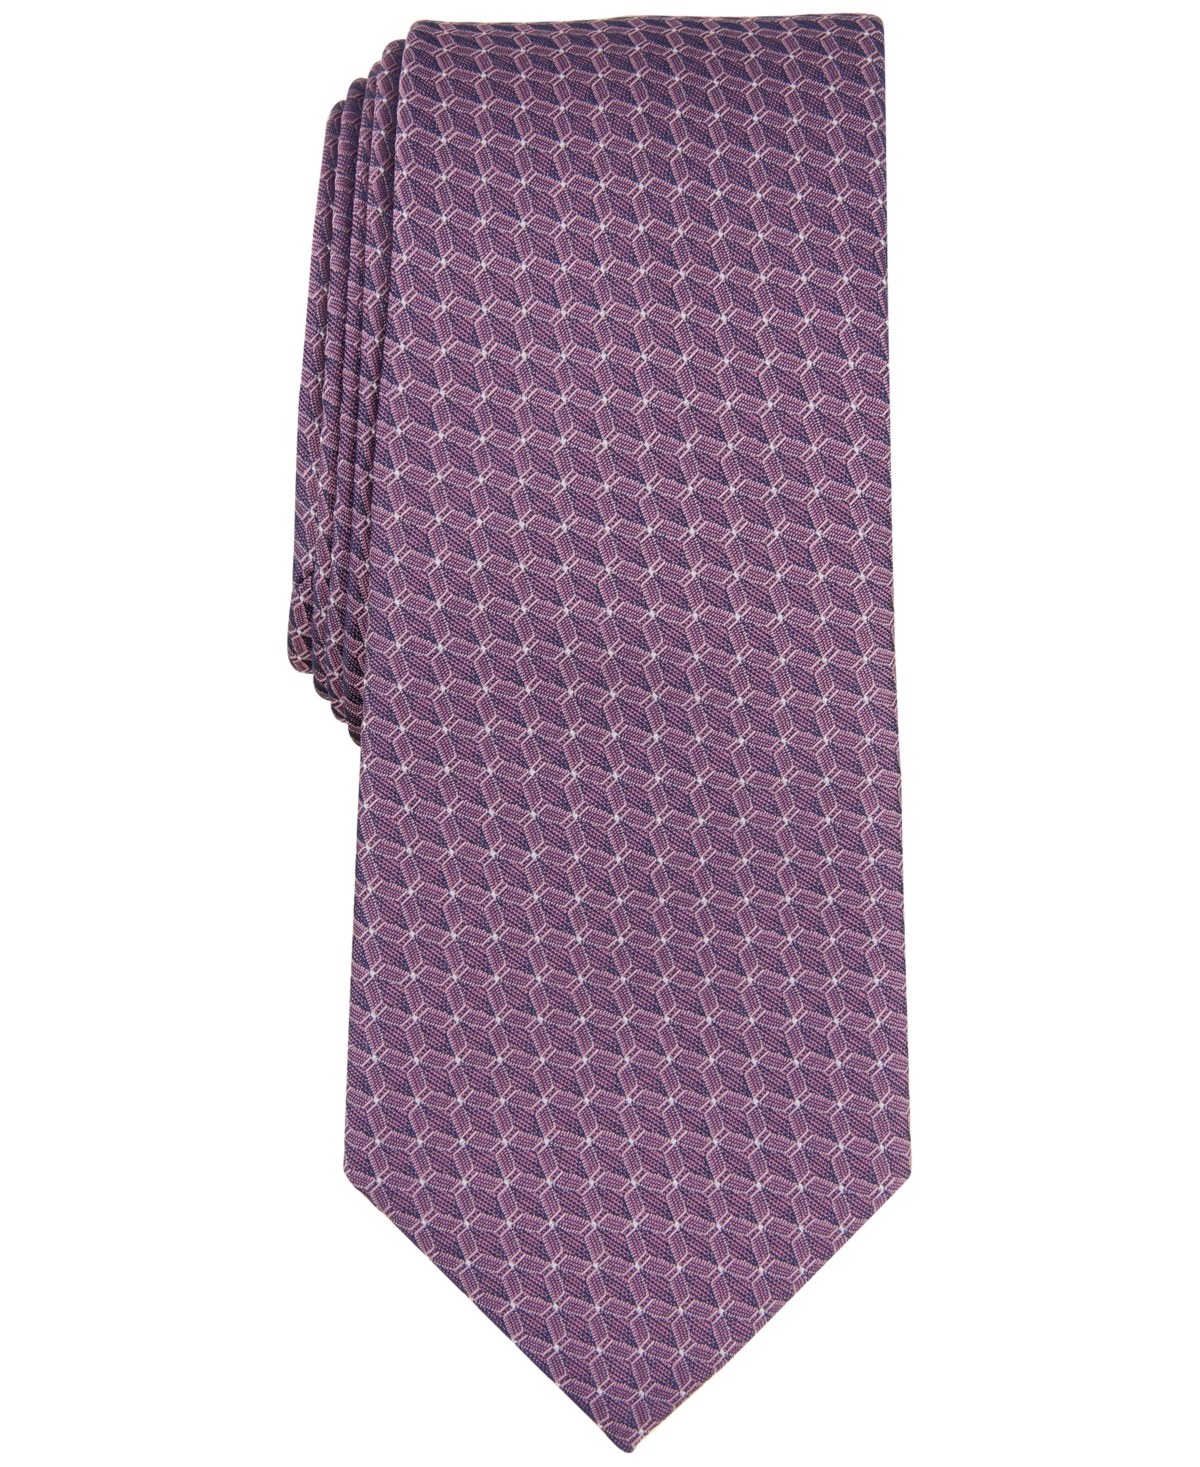 Men's Moores Geo-Pattern Tie, Created for Macy's - Red